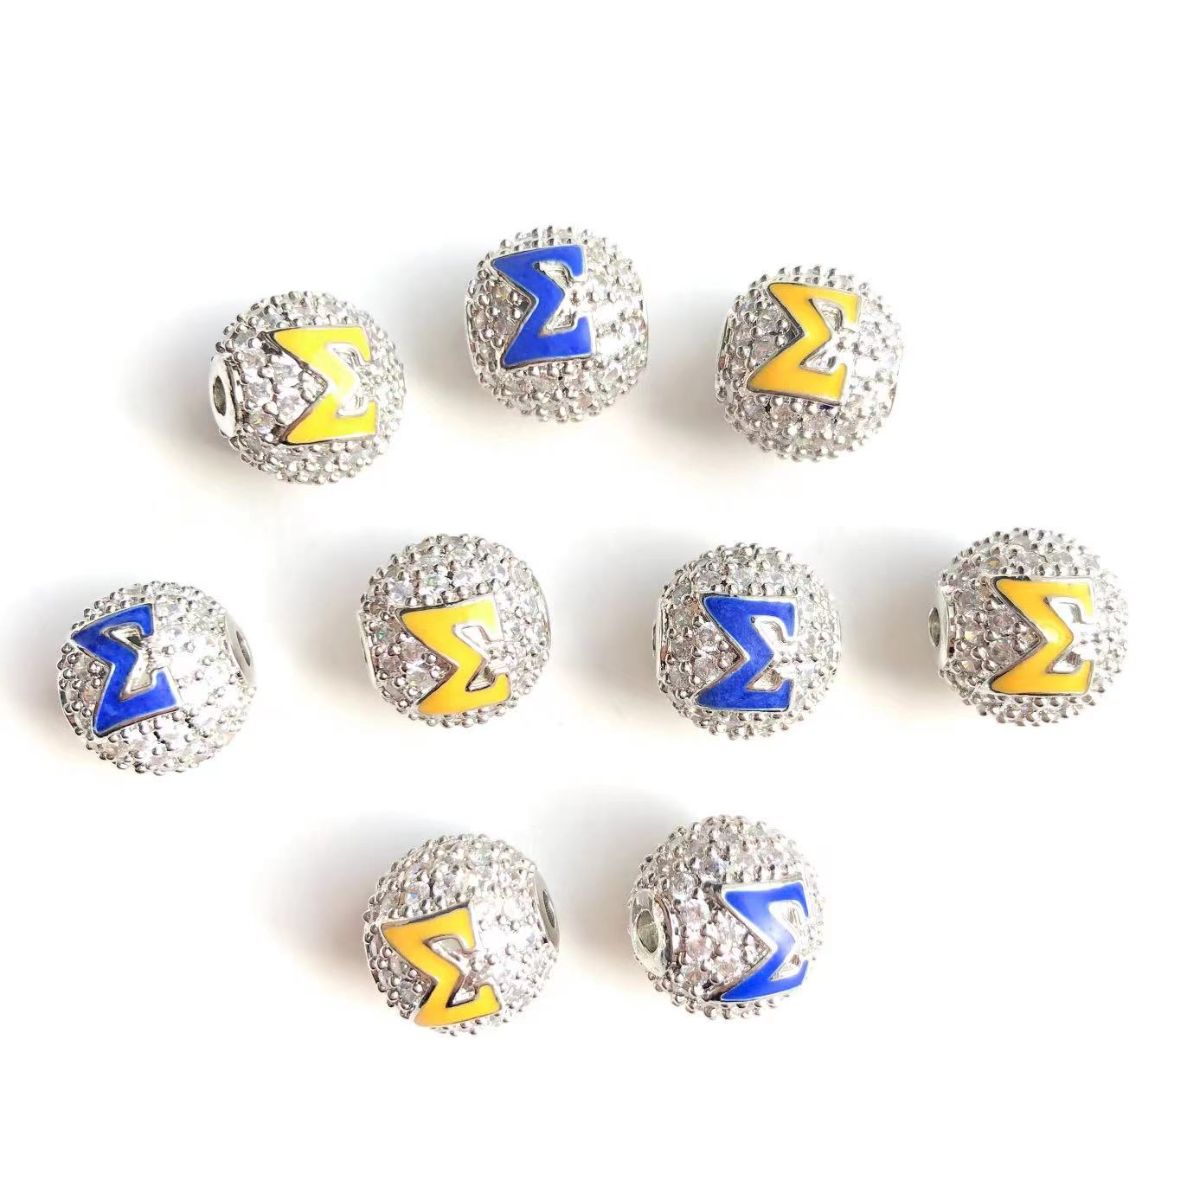 12pcs/lot 10mm Blue Yellow Enamel CZ Paved Greek Letter "Σ", "Γ", "Ρ" Ball Spacers Beads 12 Silve Σ CZ Paved Spacers 10mm Beads Ball Beads Greek Letters New Spacers Arrivals Charms Beads Beyond